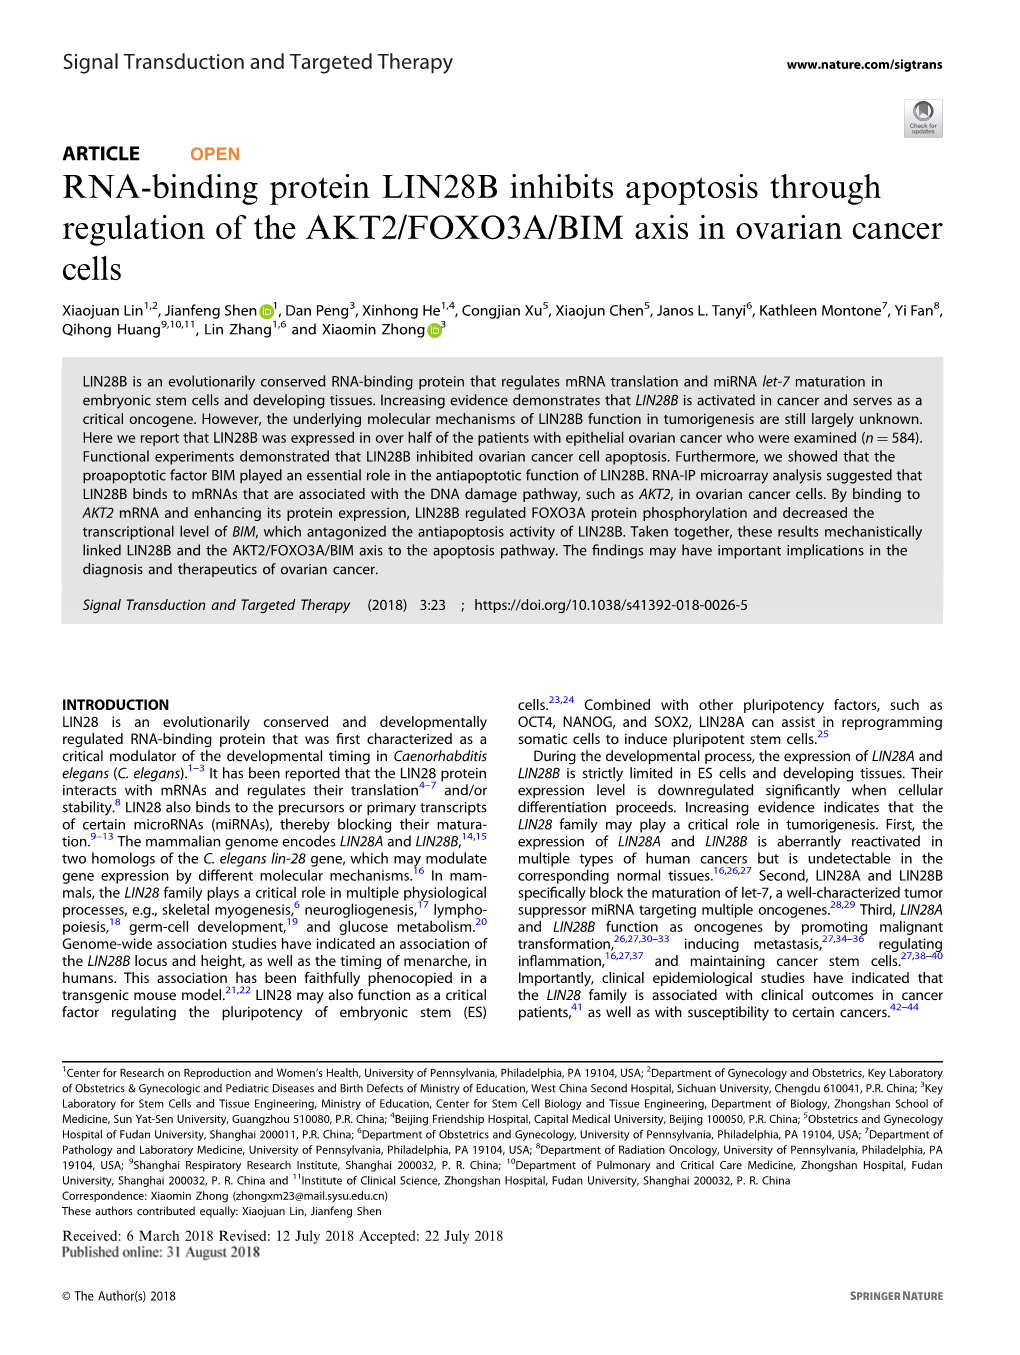 RNA-Binding Protein LIN28B Inhibits Apoptosis Through Regulation of the AKT2/FOXO3A/BIM Axis in Ovarian Cancer Cells